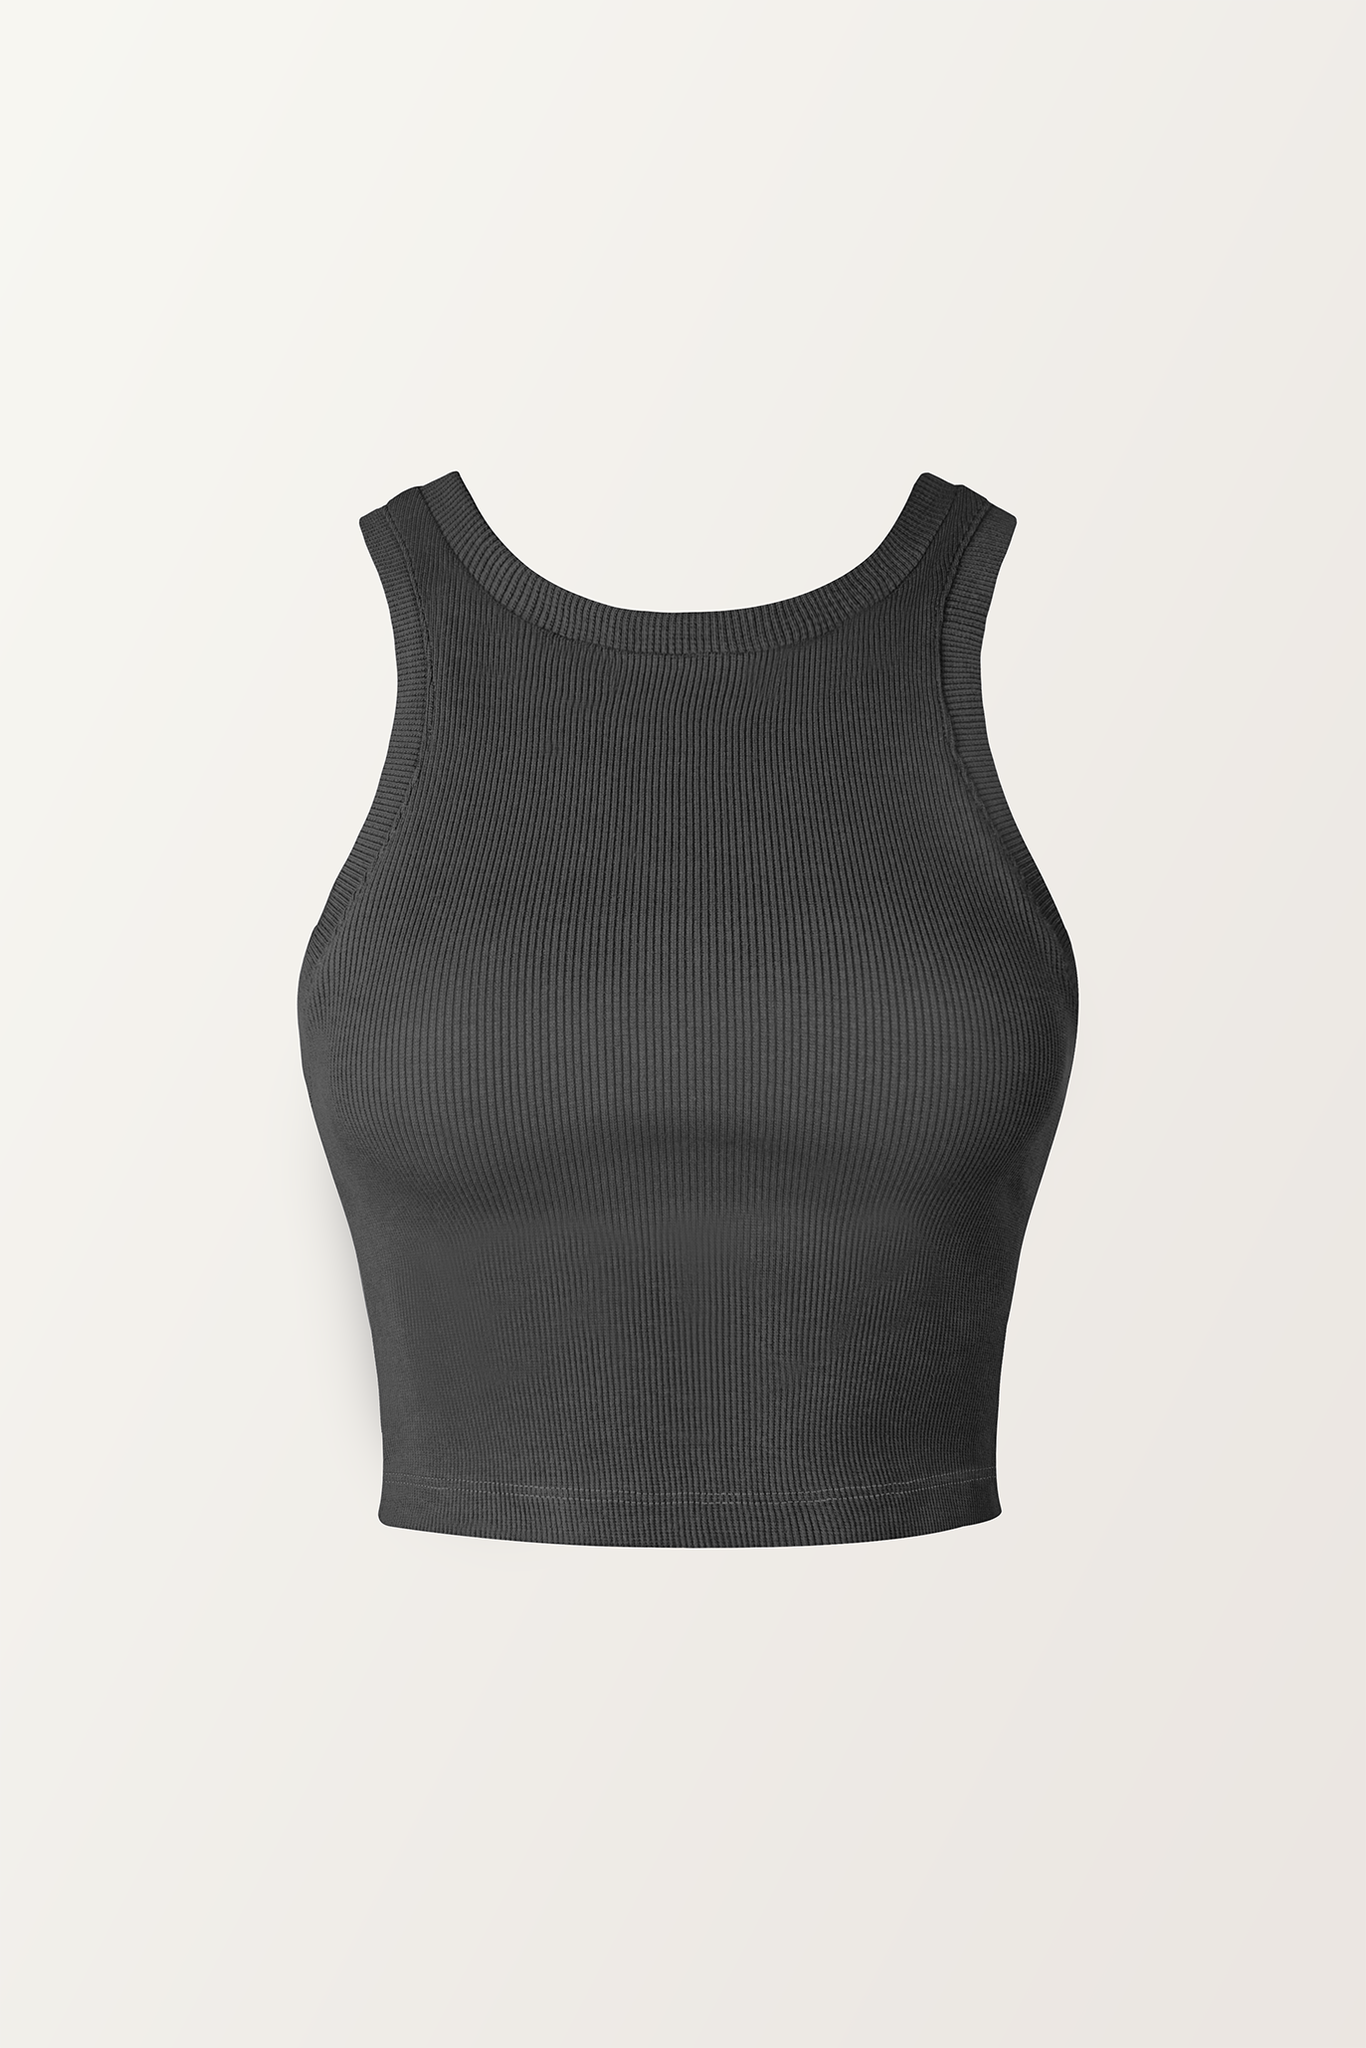 PIXIE WON'T PLAY CROFT CROP TOP RIBBED CARBON GREY ORGANIC COTTON SUSTAINABLE FASHION WEAR WITHOUT BRA LUXURY SLEEVELESS STYLISH COMFORTABLE BREATHABLE FABRIC VERSATILE RELAXED FIT SOFT TRENDY SUMMER AUTUMN WINTER SPRING WEAR CASUAL OUTFIT WORKOUT LAYERING VARIOUS COLORS FASHIONABLE MUST-HAVE 